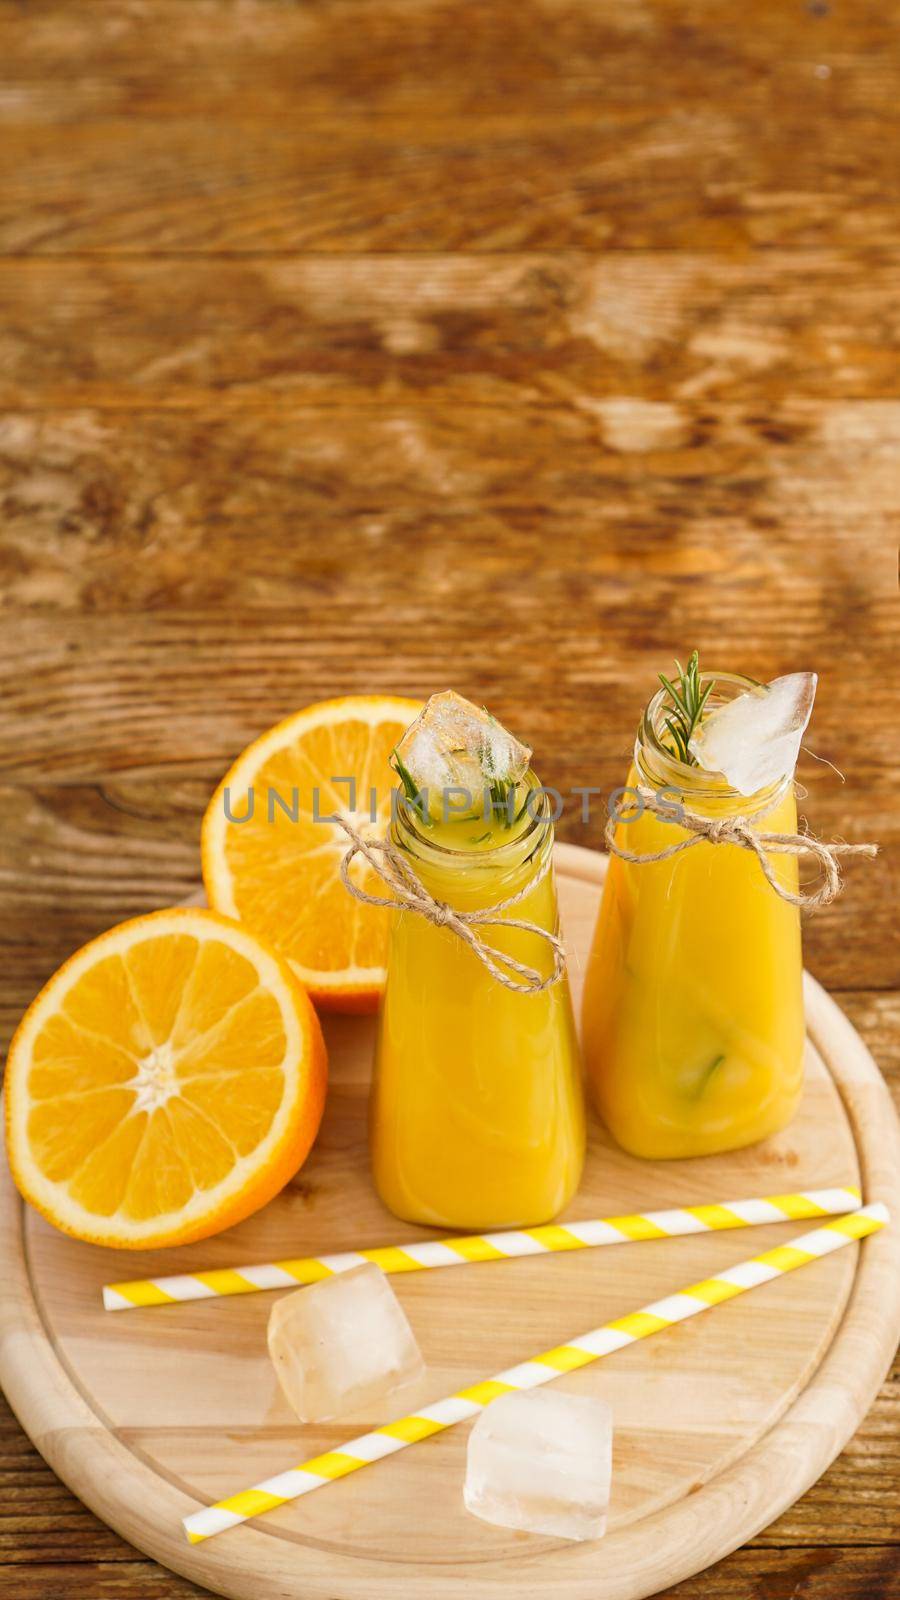 Orange juice on a wooden tray. Sliced orange and ice cubes. Snack at the resort, coolness on a hot summer day. Vertical photo